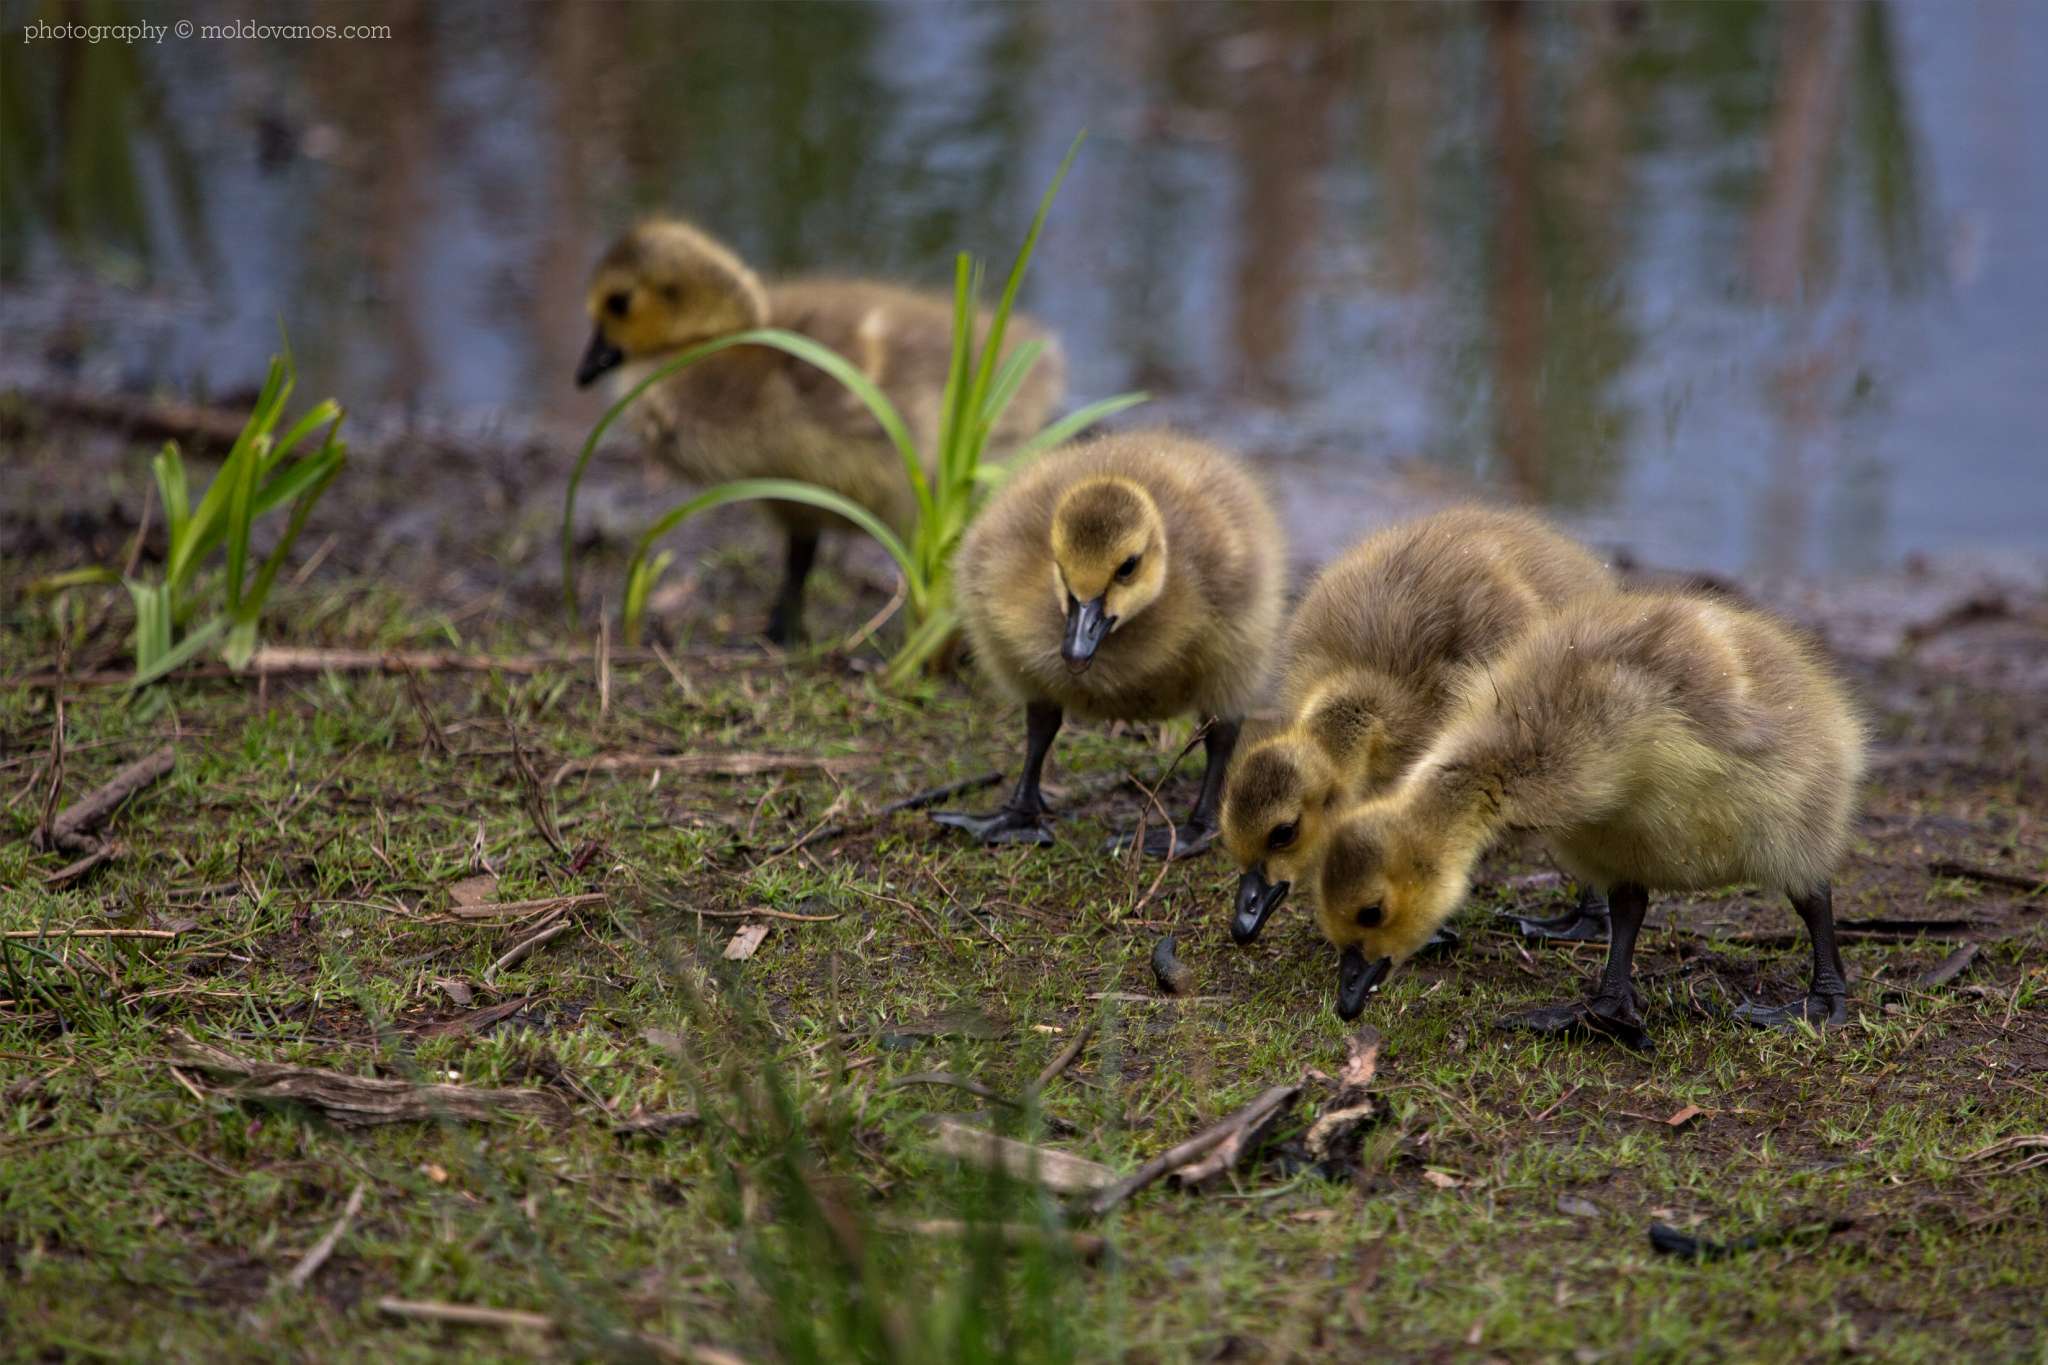 Goslings- Canadian Geese- Nature Photography - Photography by Paul Moldovanos © moldovanos.com